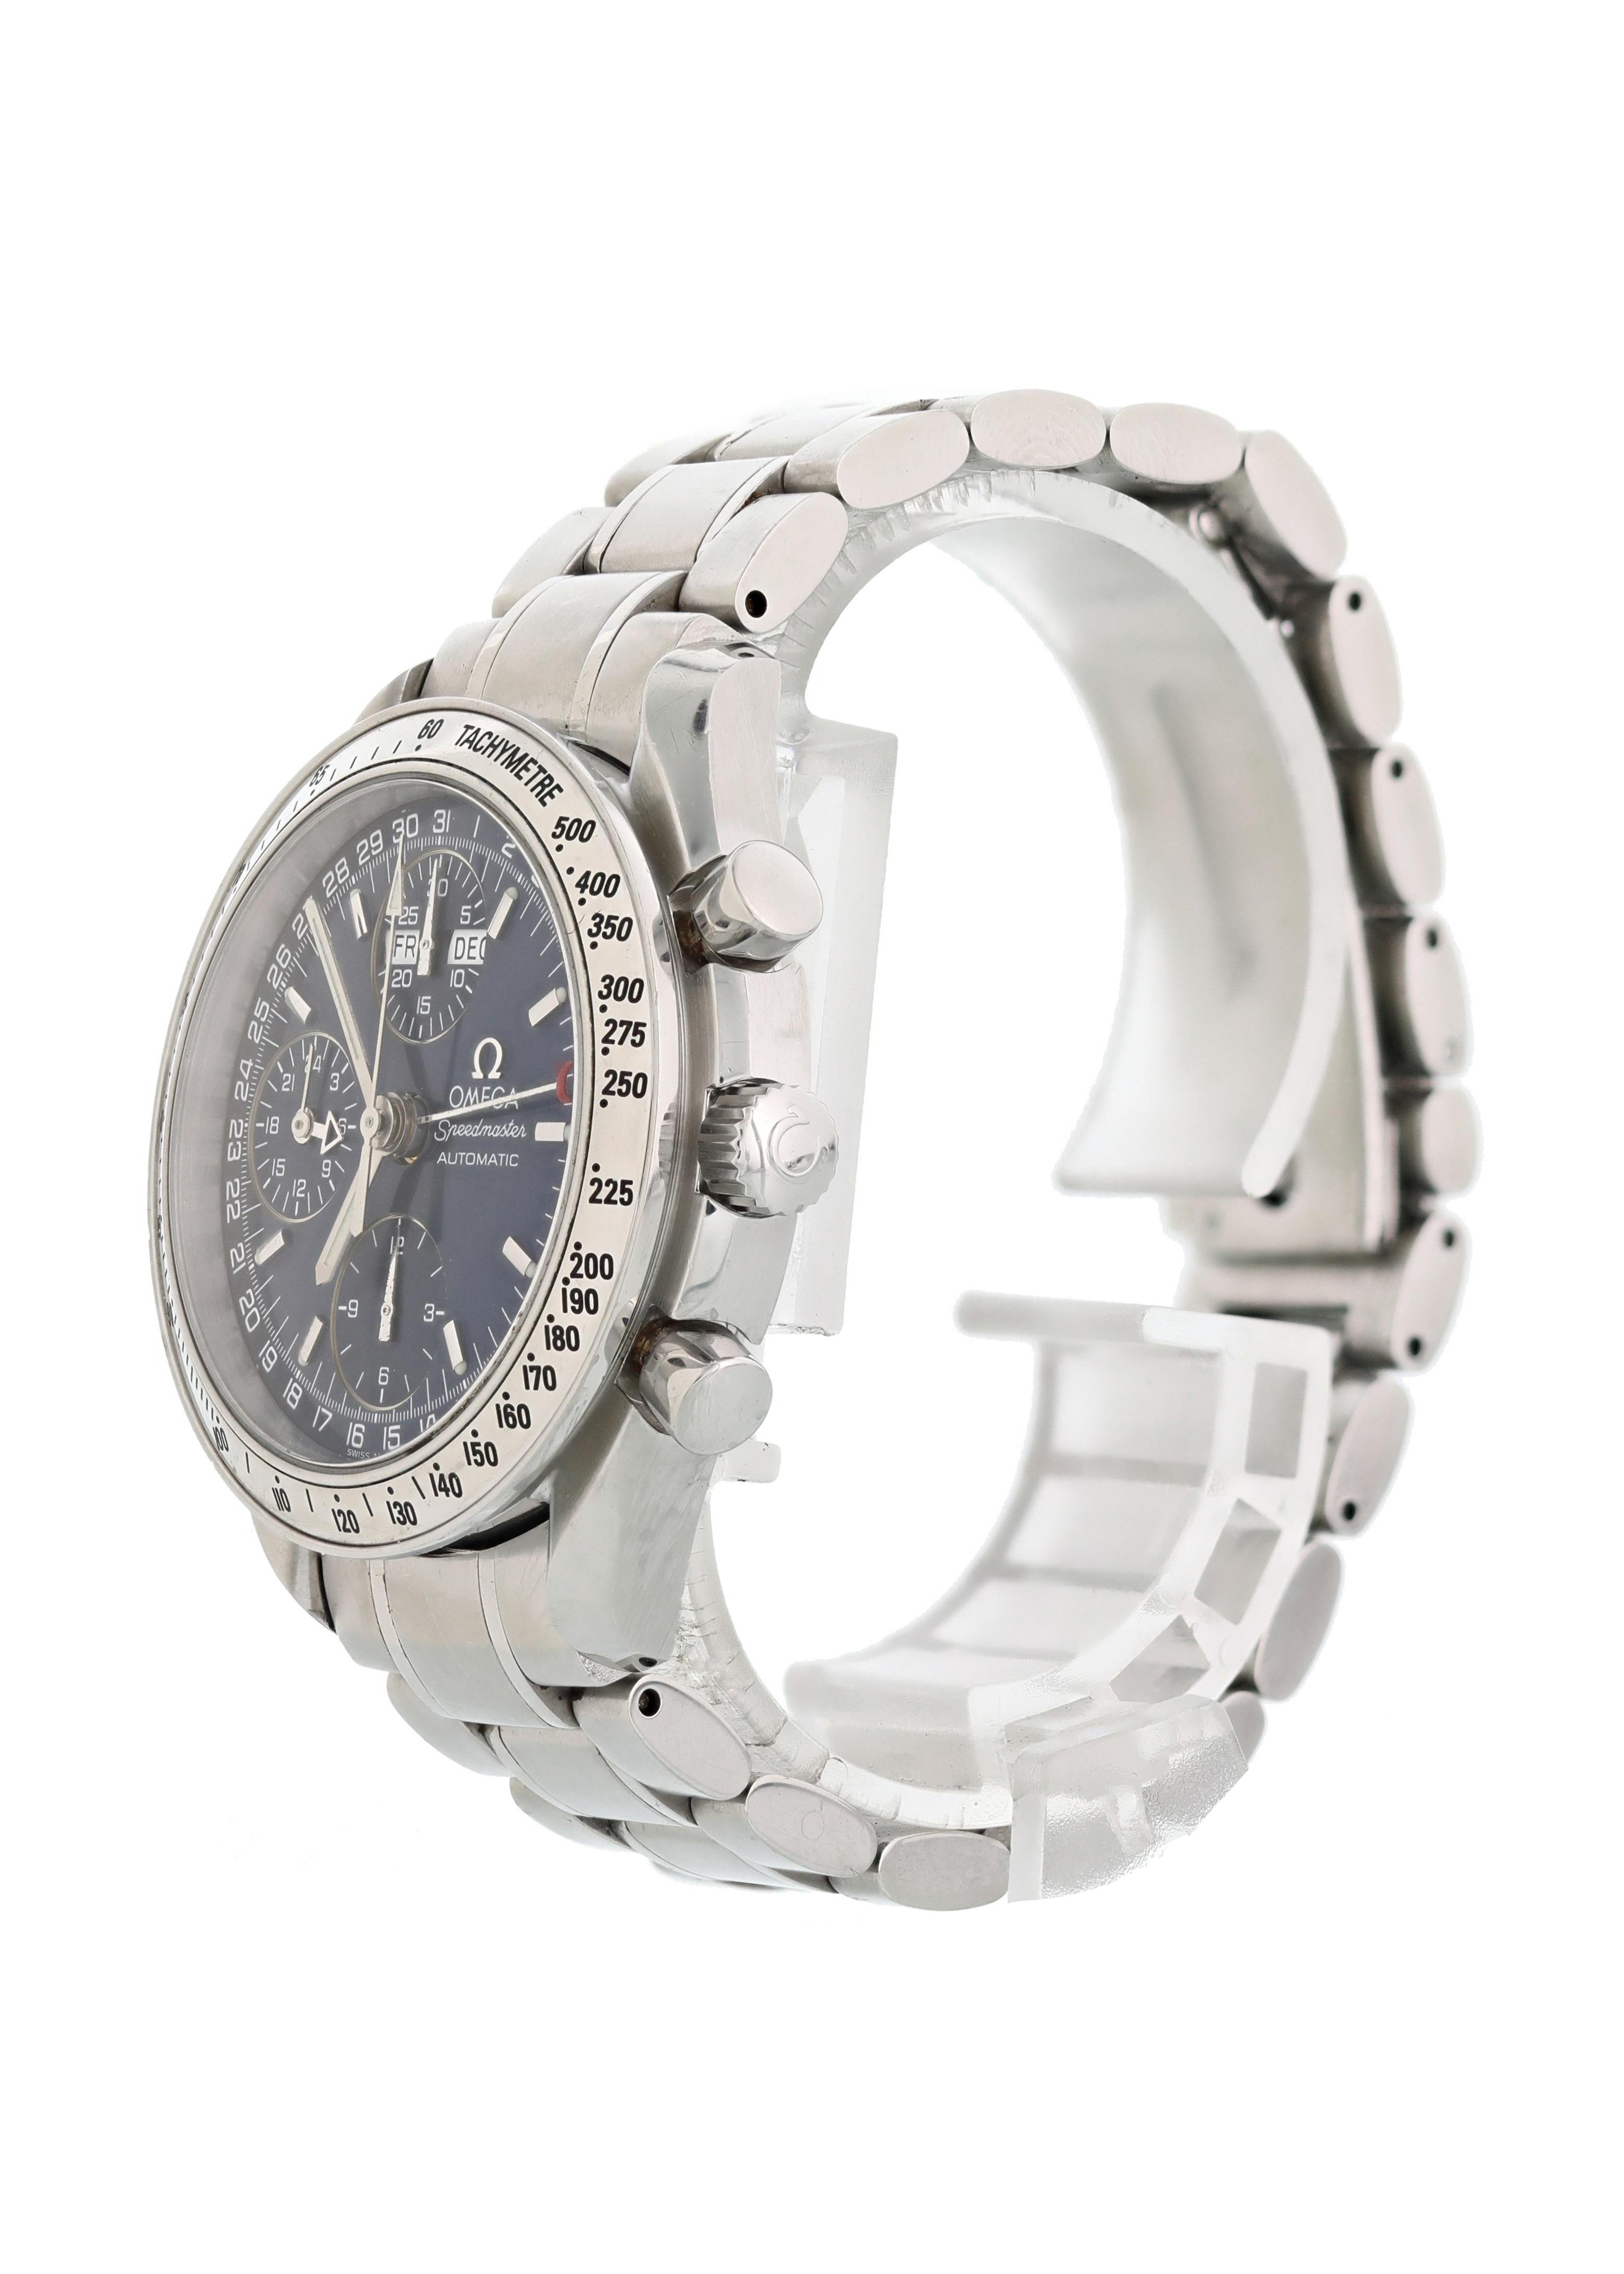 Omega Speedmaster Triple Date 3523.30 Mens Watch. 39mm stainless steel cases. Tachymetre stainless steel bezel. Blue dial with steel luminous hands and luminous hour index markers. Minute markers around the outer rim. Triple date function with a day